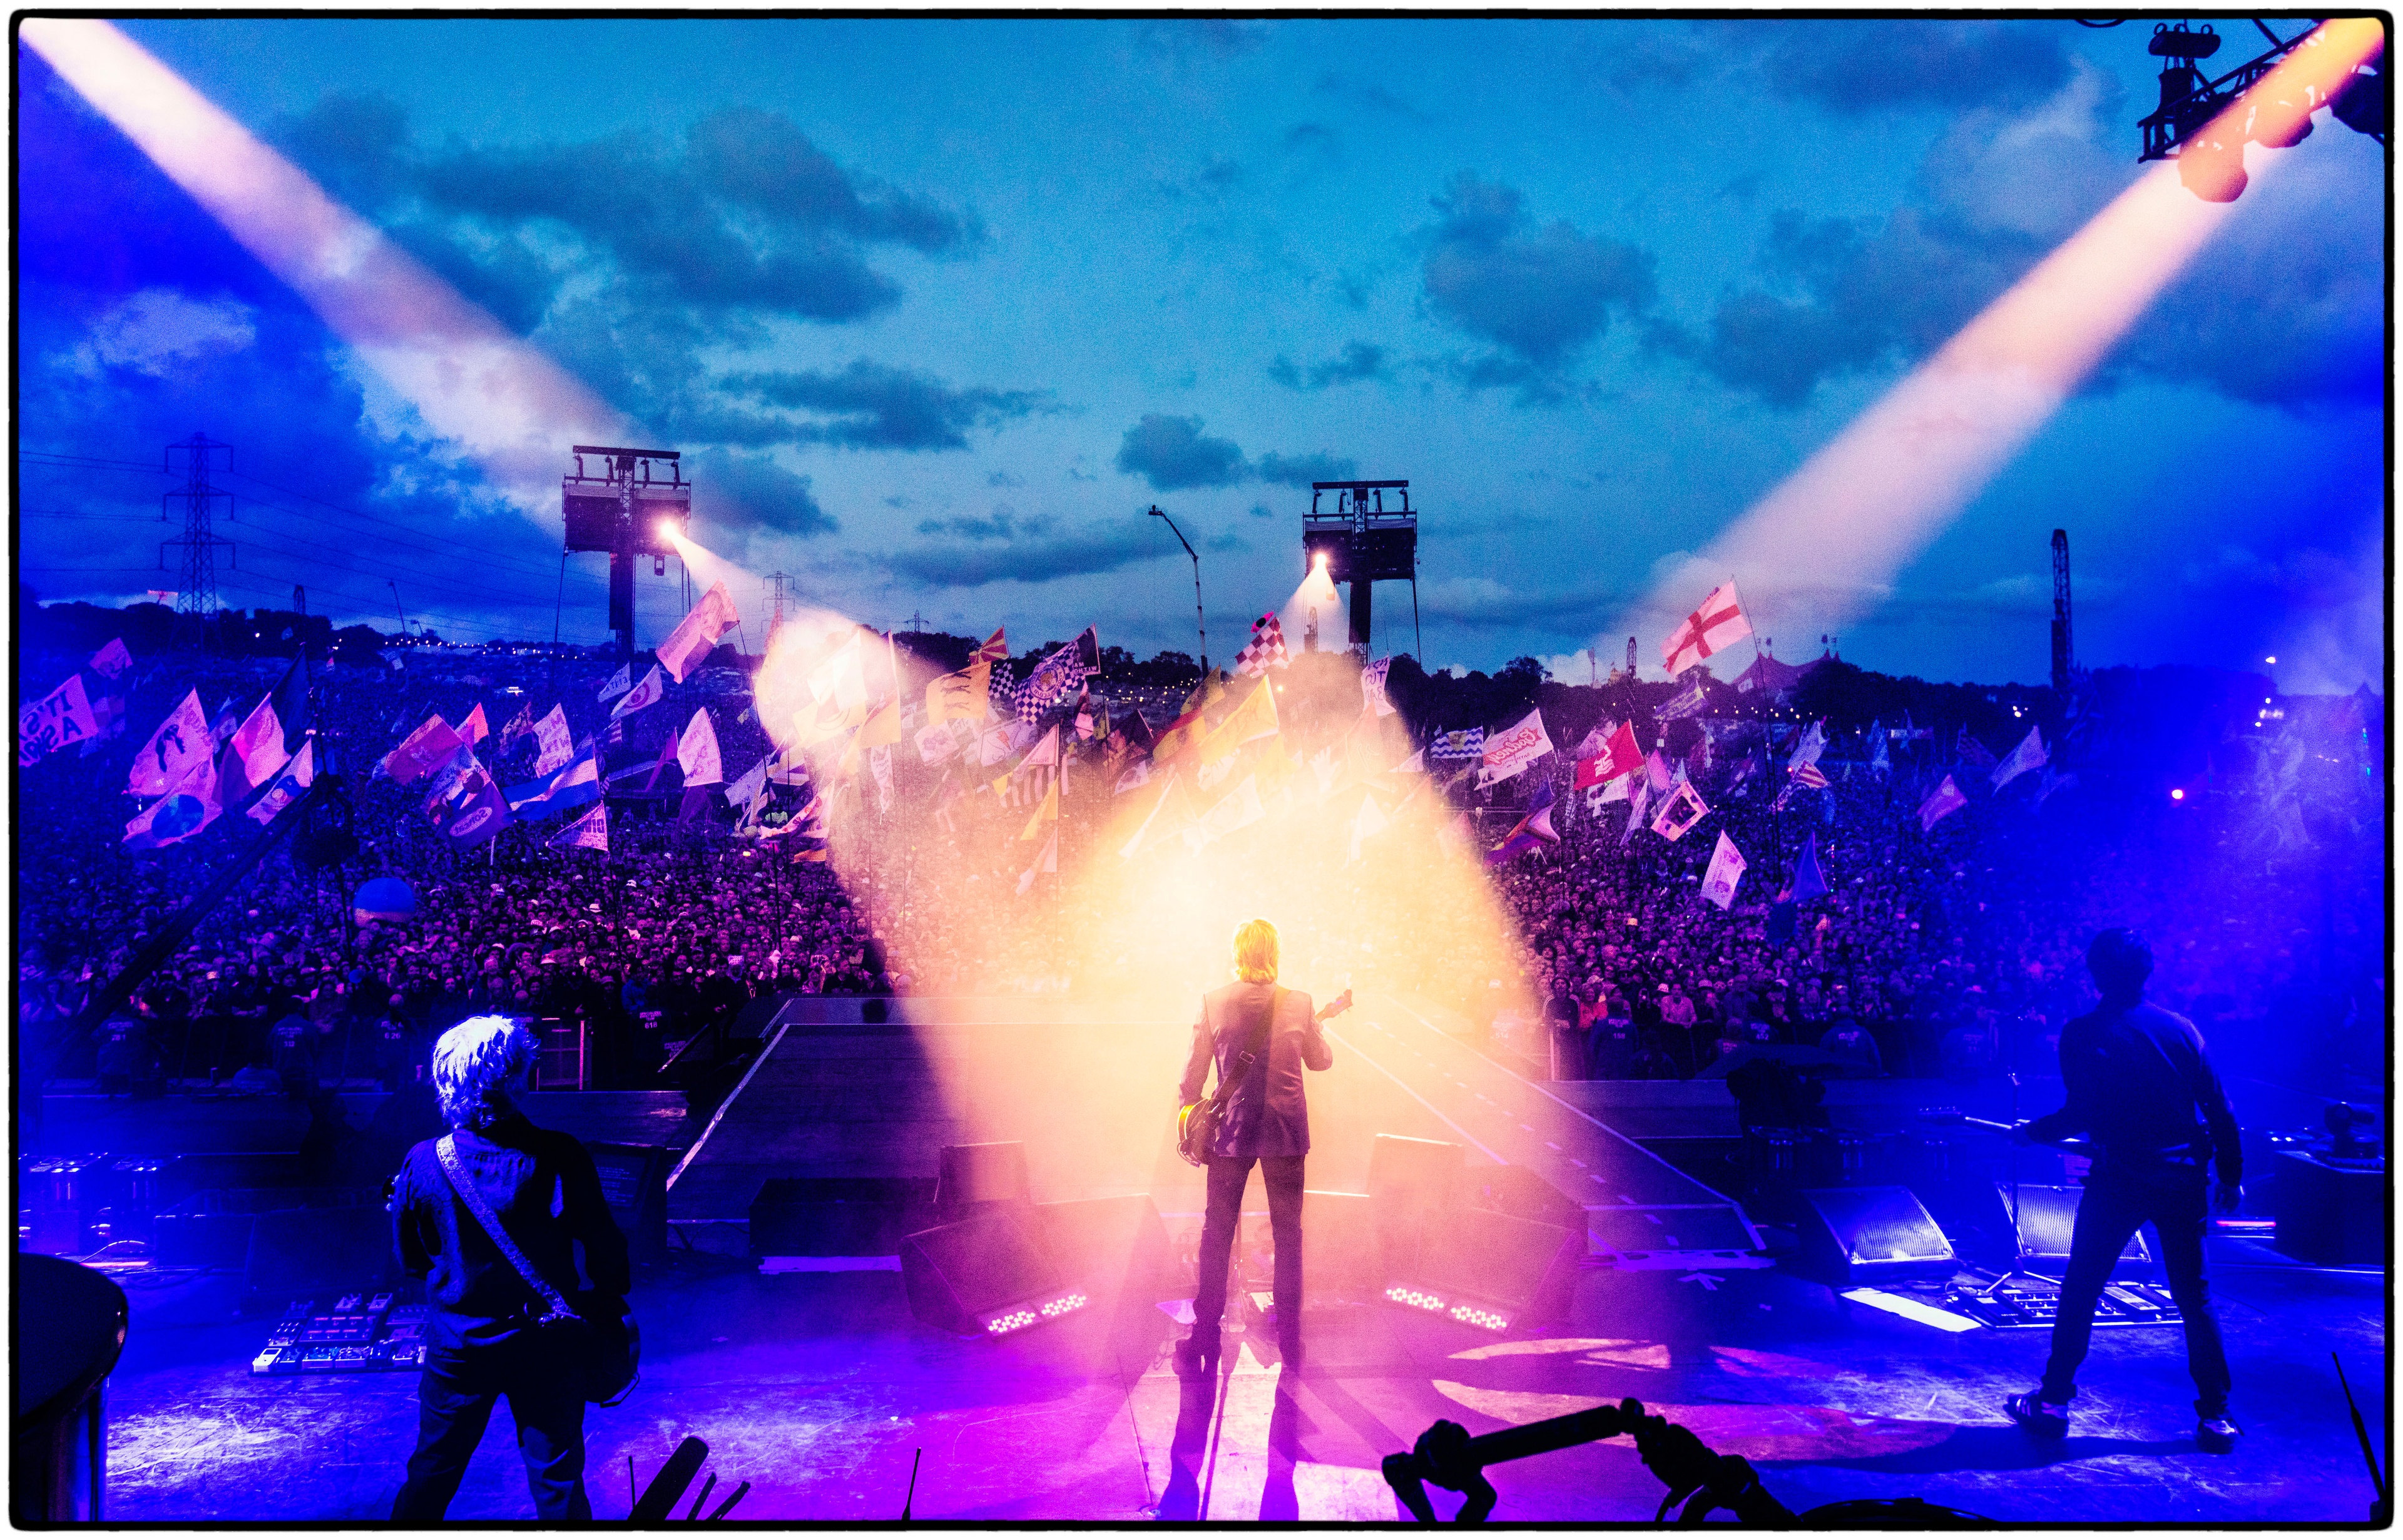 Paul stands facing the crowd at Glastonbury, illuminated by a spotlight